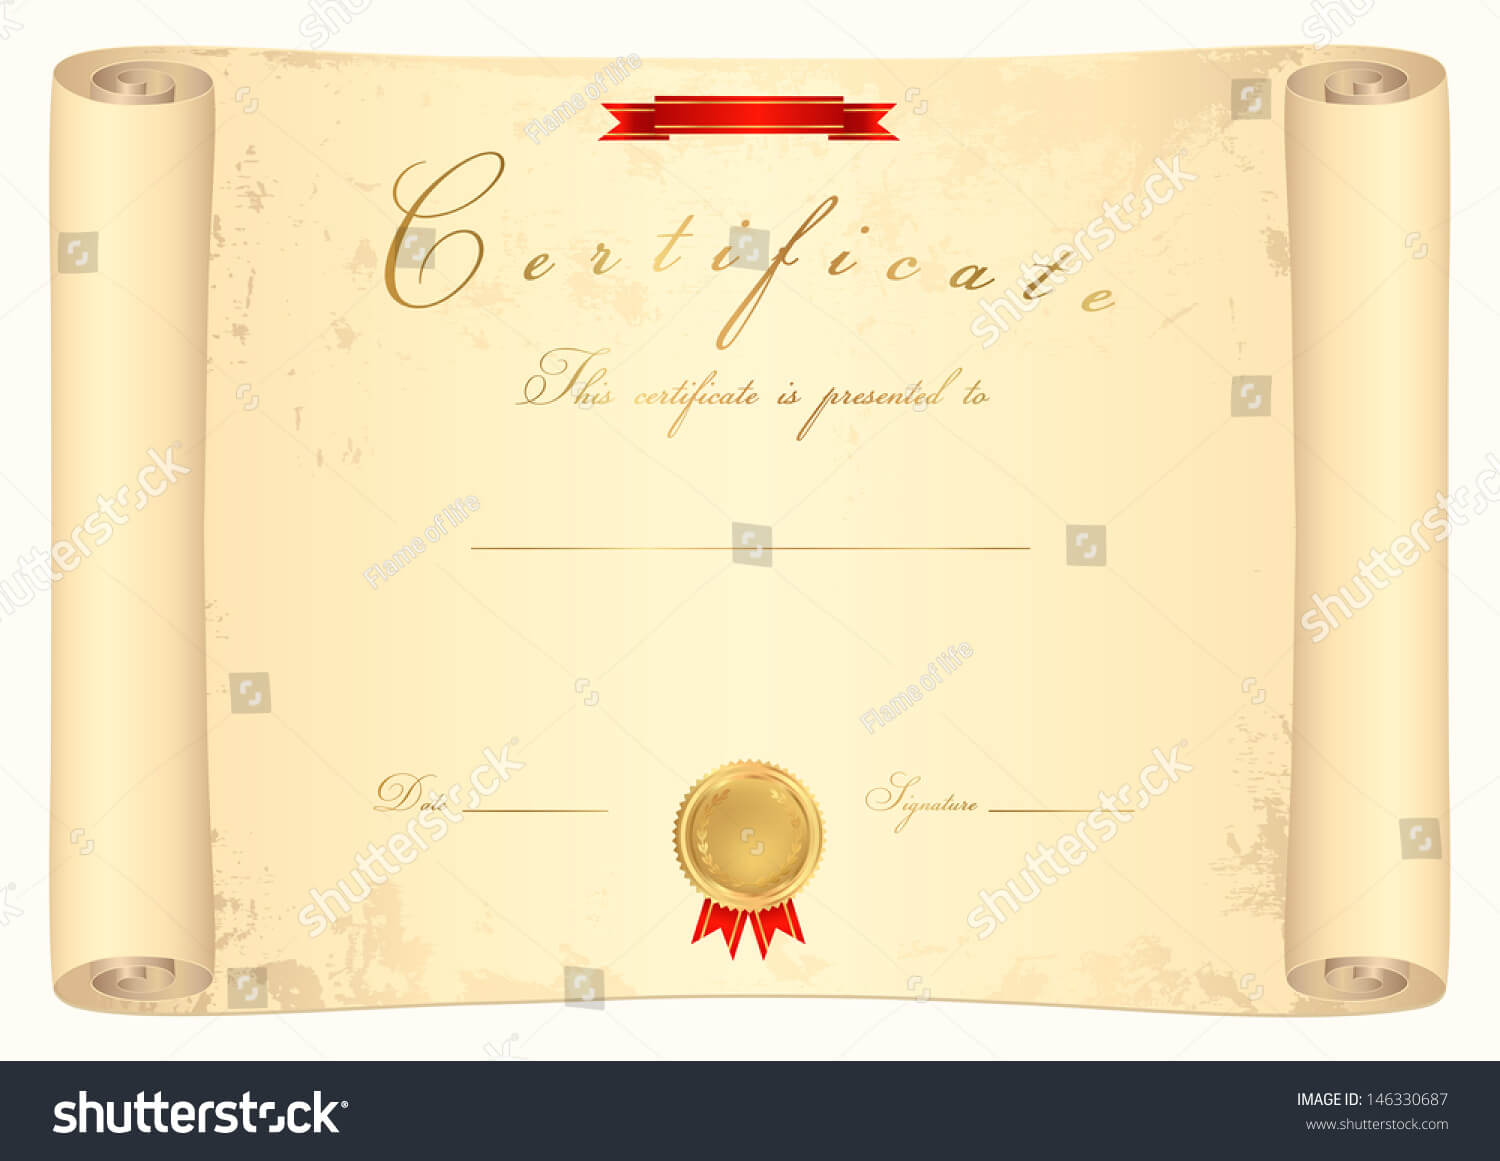 Scroll Certificate Completion Template Sample Background Inside Certificate Scroll Template